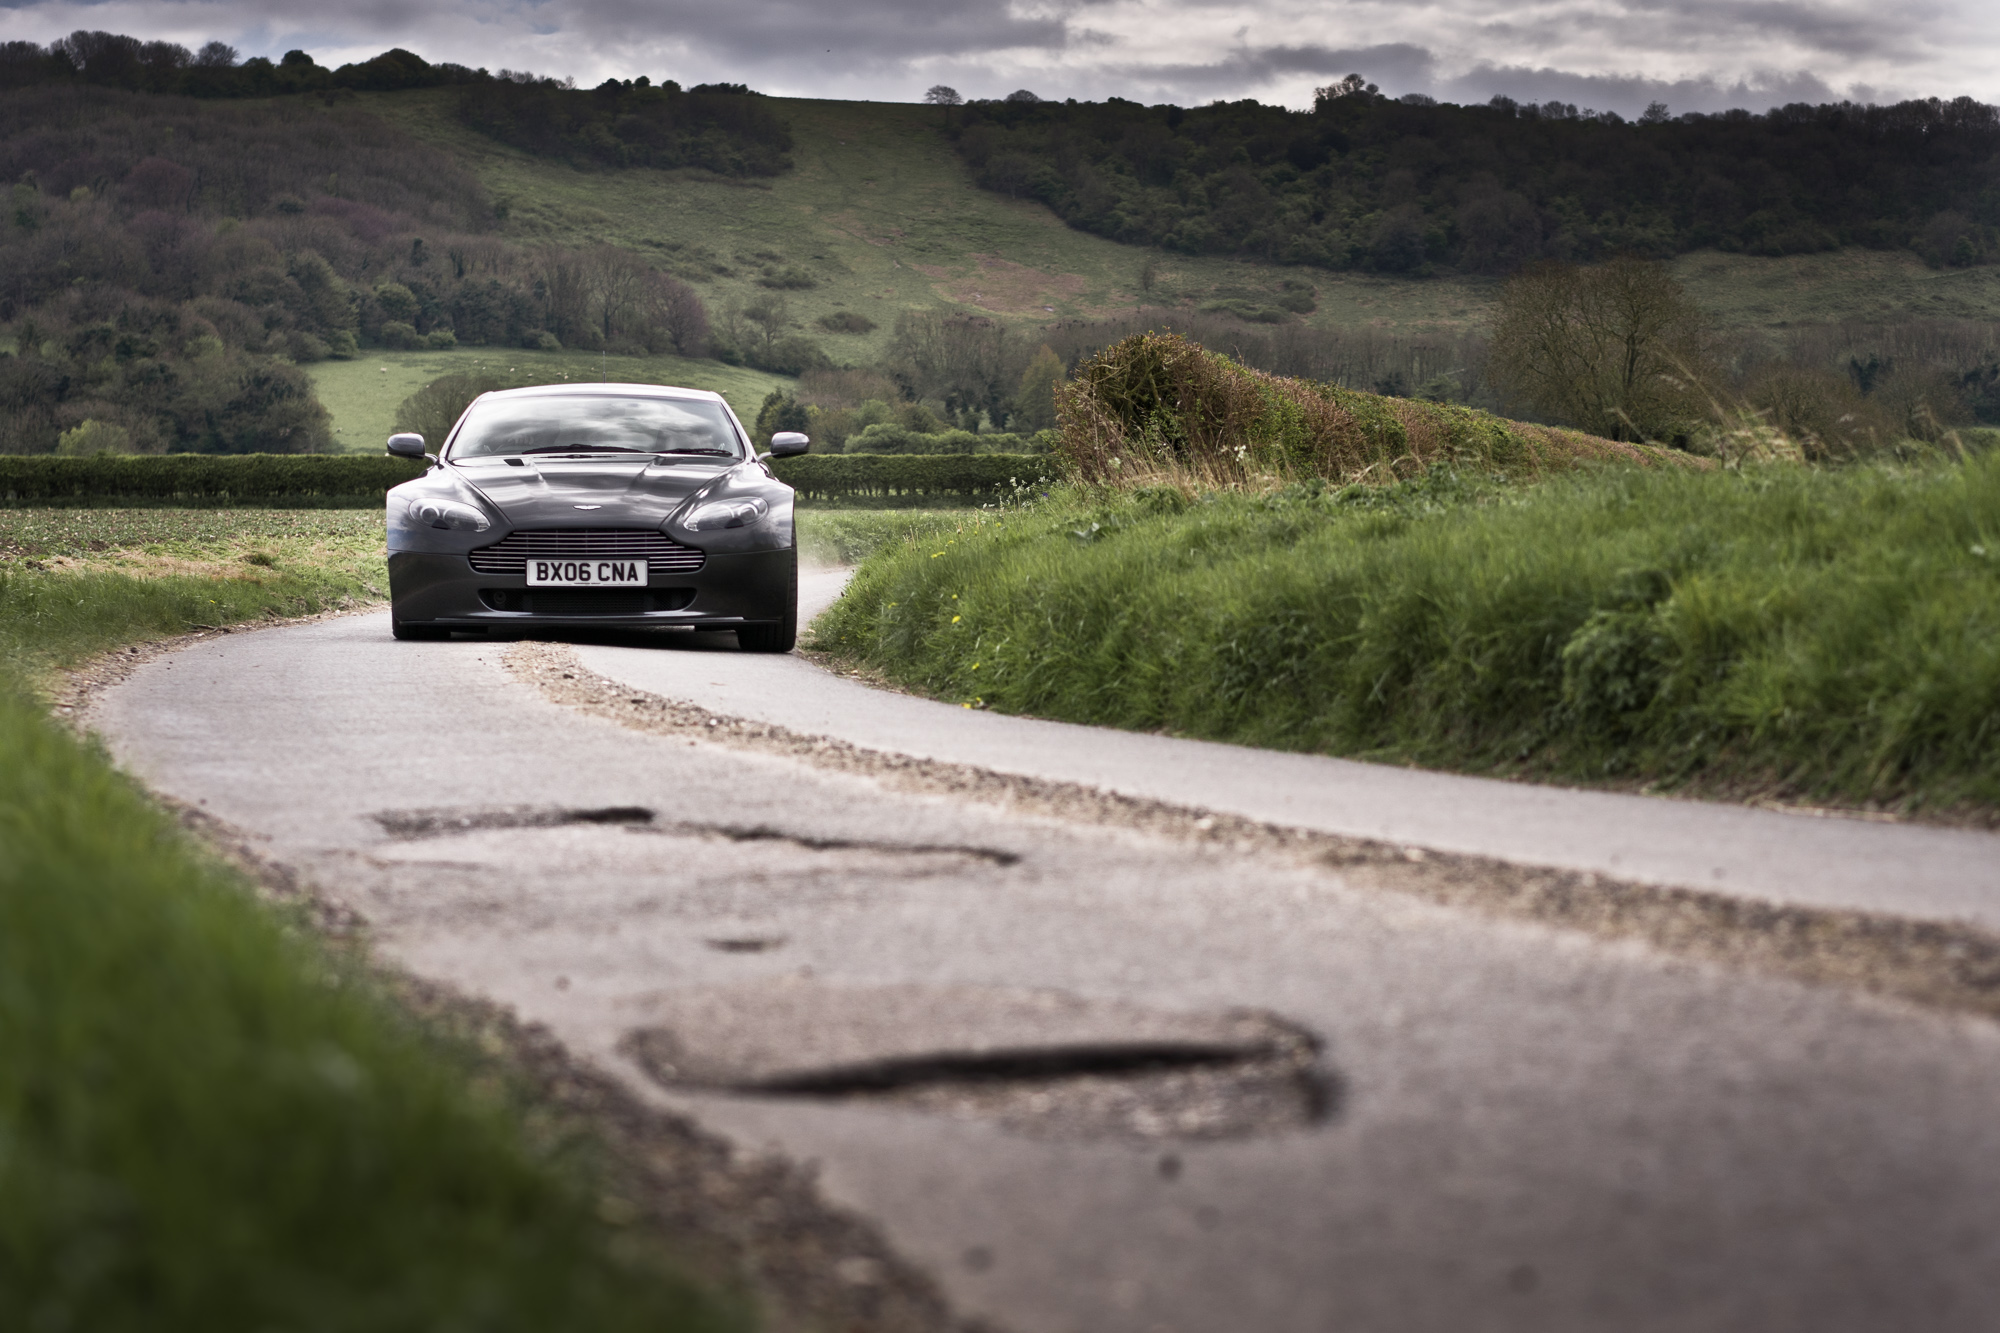 So what have you done with your Aston today? - Page 319 - Aston Martin - PistonHeads